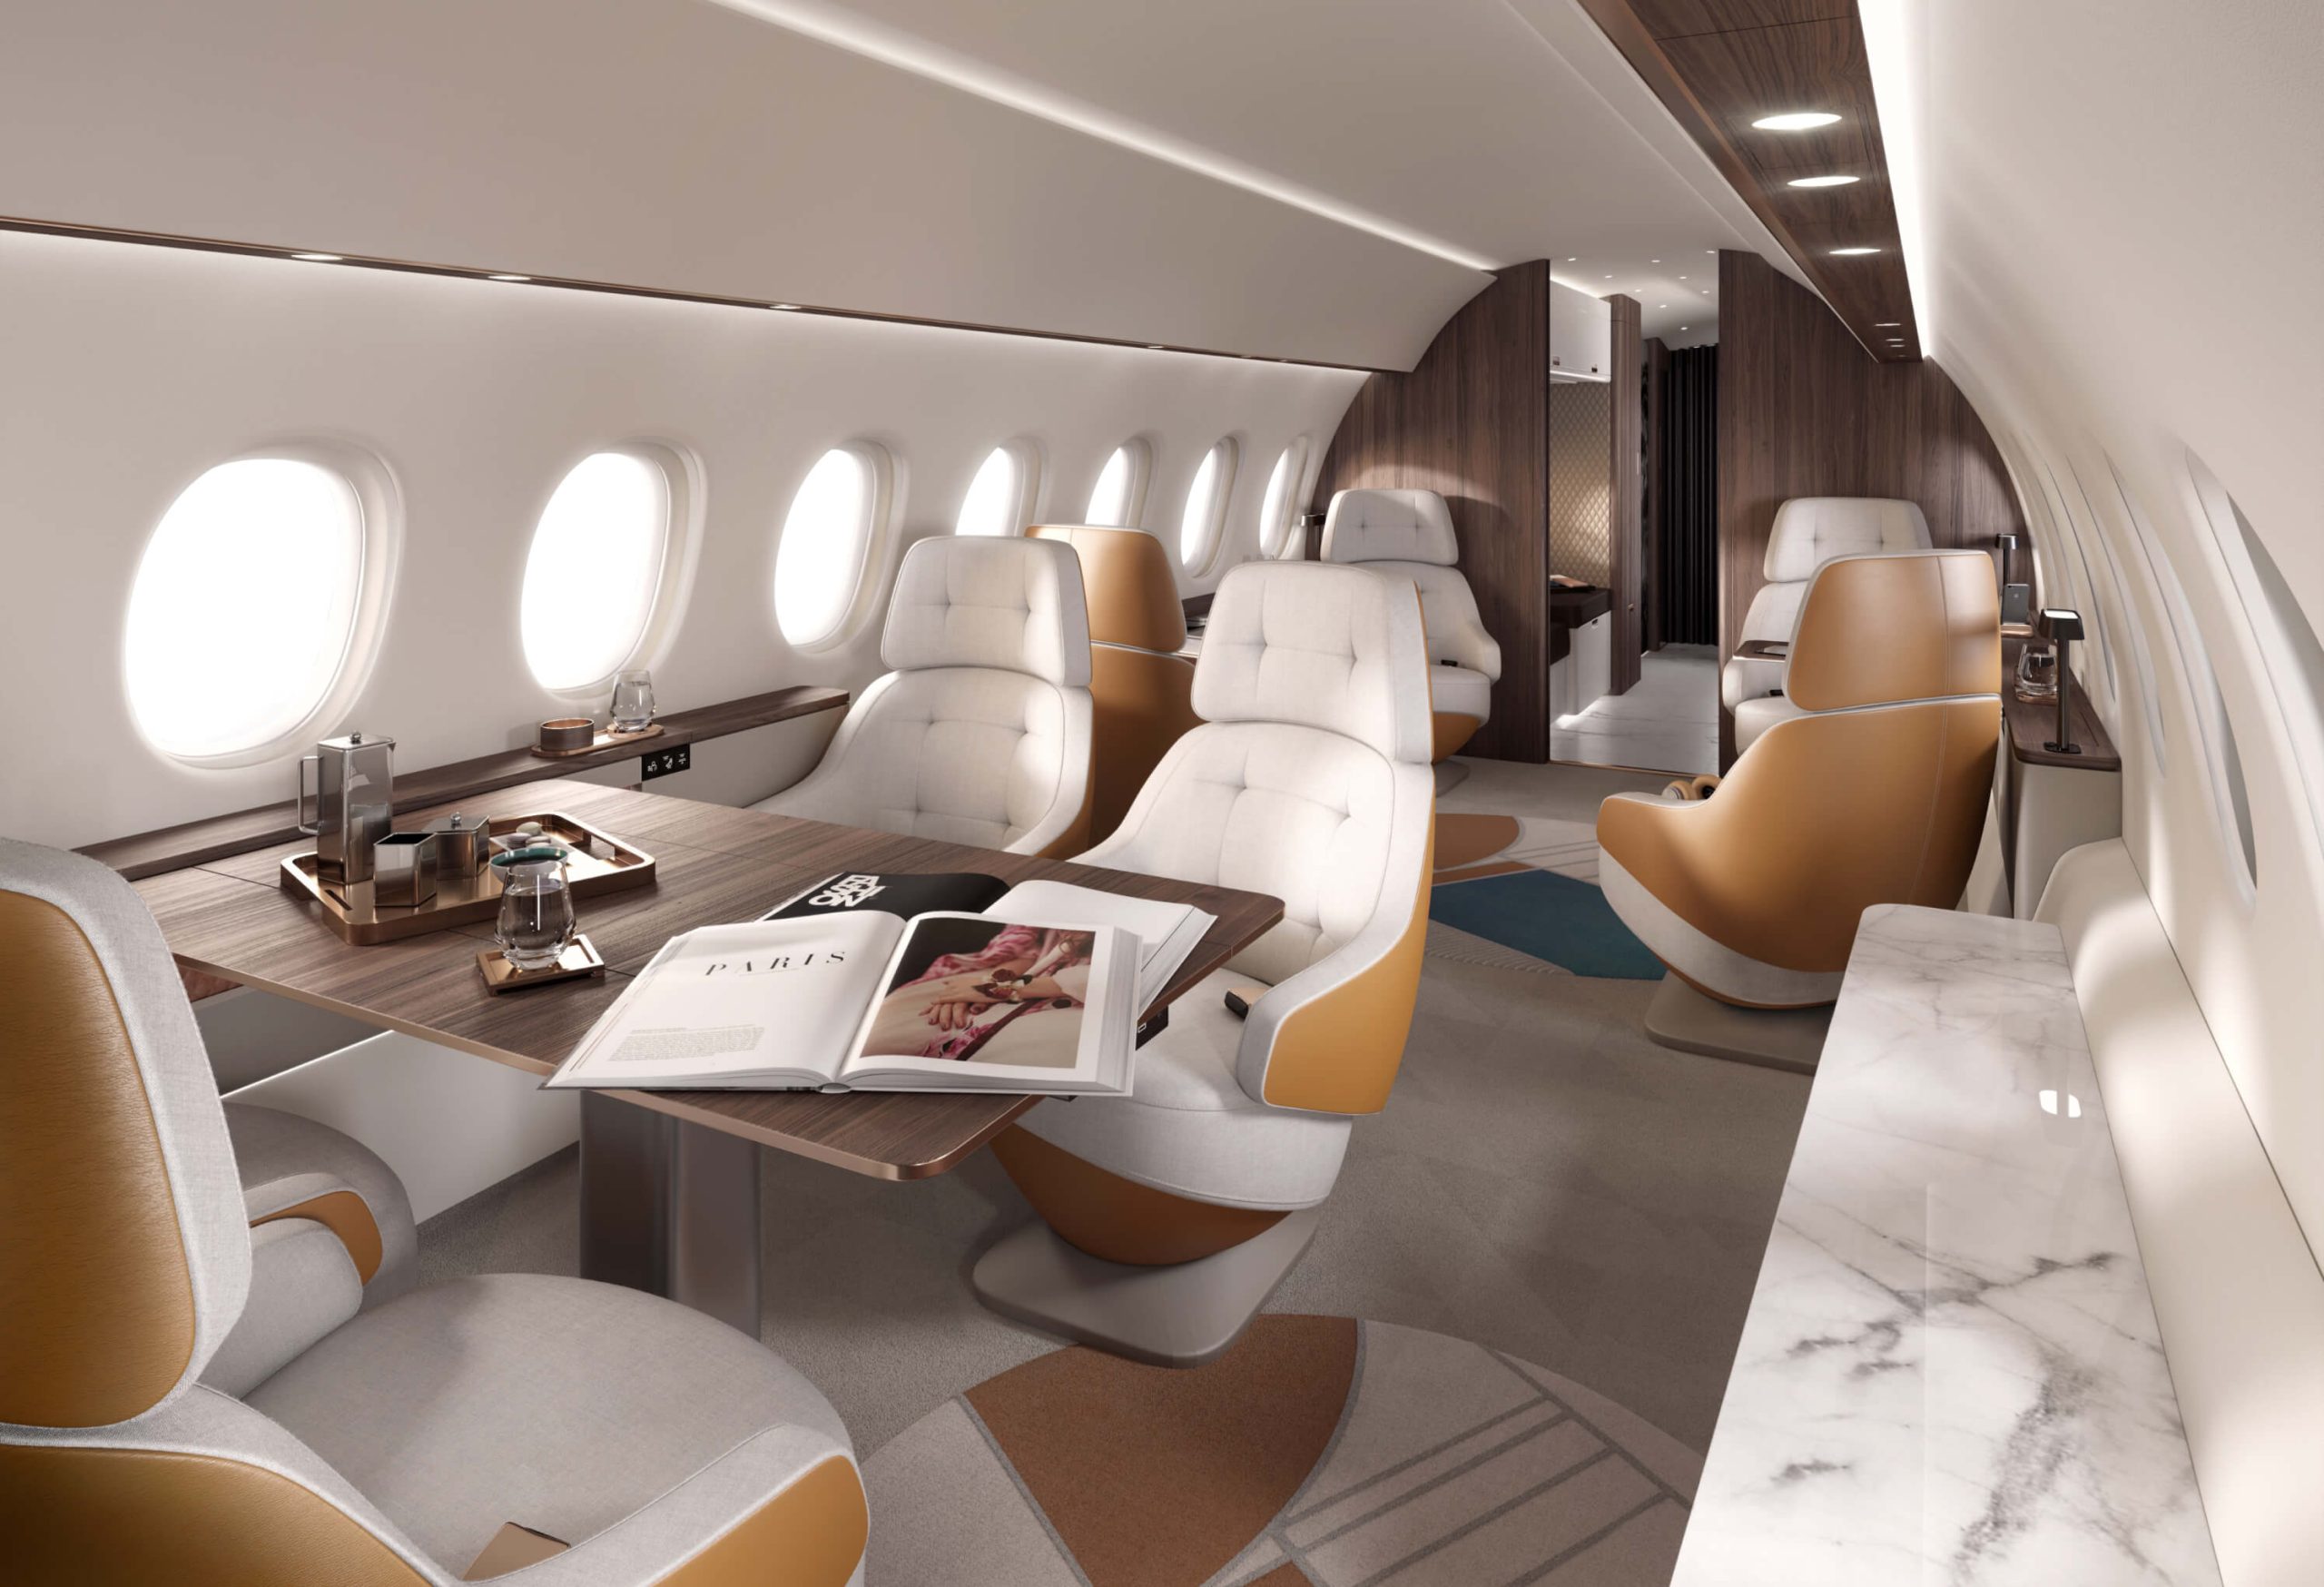 Luxury private airplane with style books and conversation seating